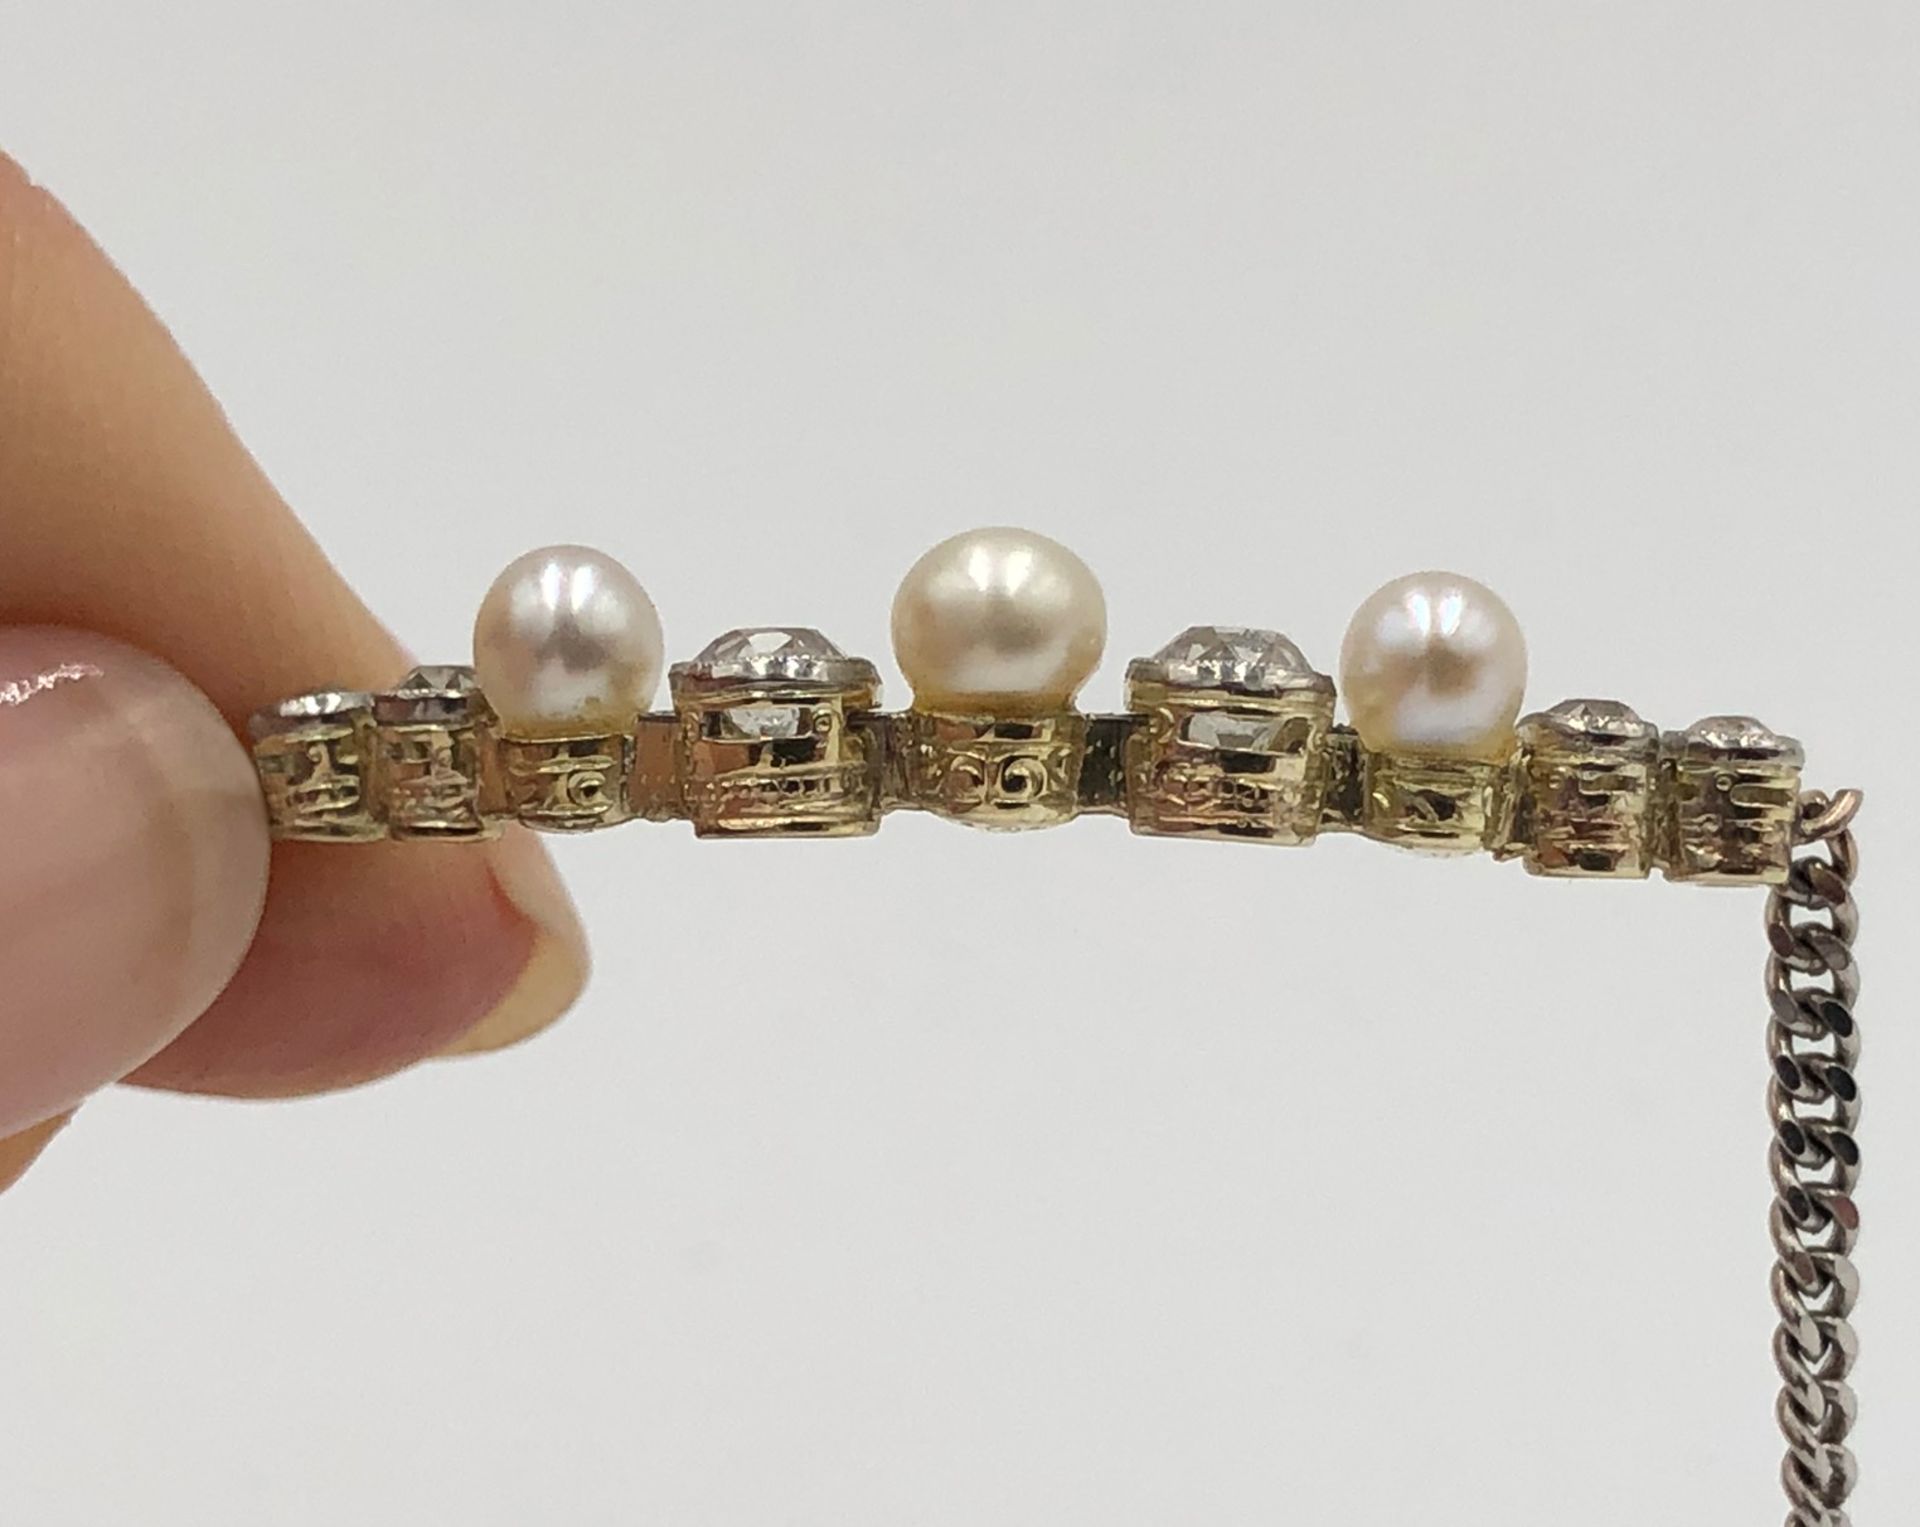 Necklace yellow and white - 585 gold. 3 cultured pearls and 6 diamonds.7.3 grams gross. The diamonds - Image 3 of 5